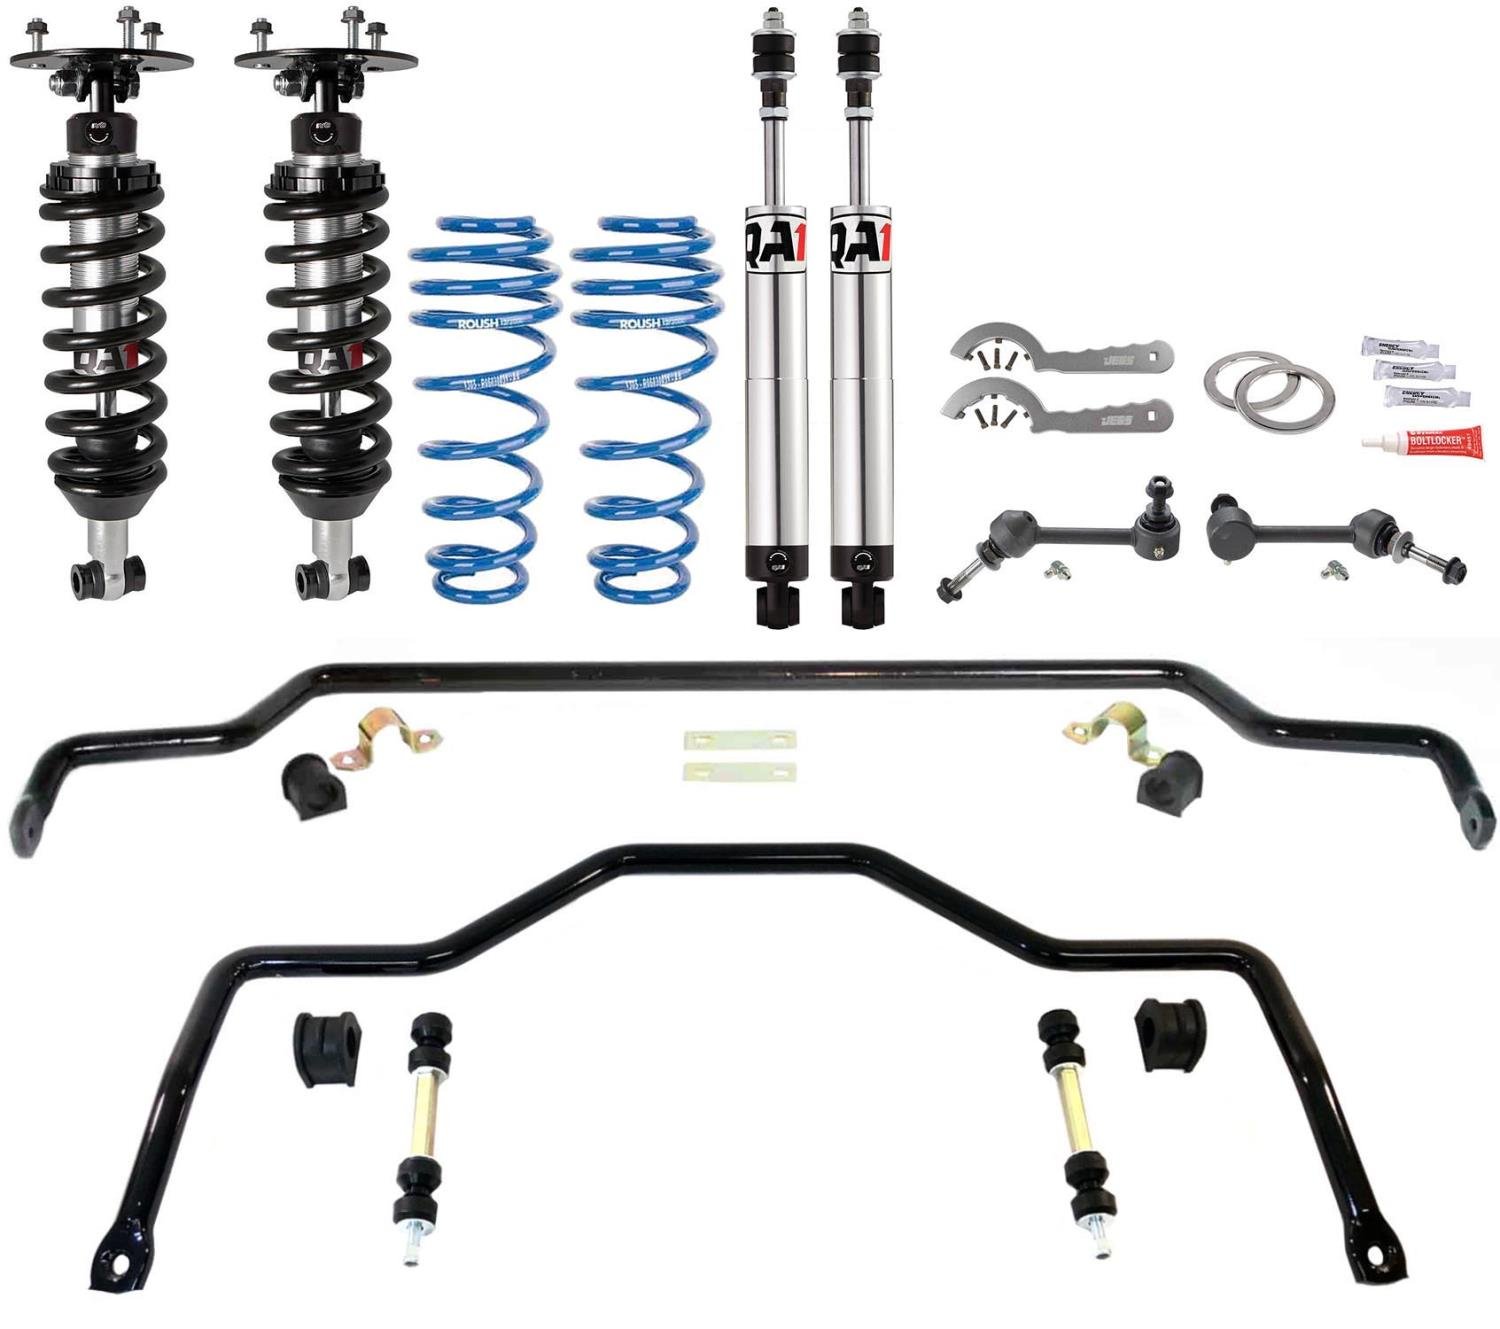 Pro Coil Coil-Over Handling Kit 2003-2011 Ford Crown Victoria, Ride Height: 0-2 in. Front Lowered, -2.500 in. Rear Lowered